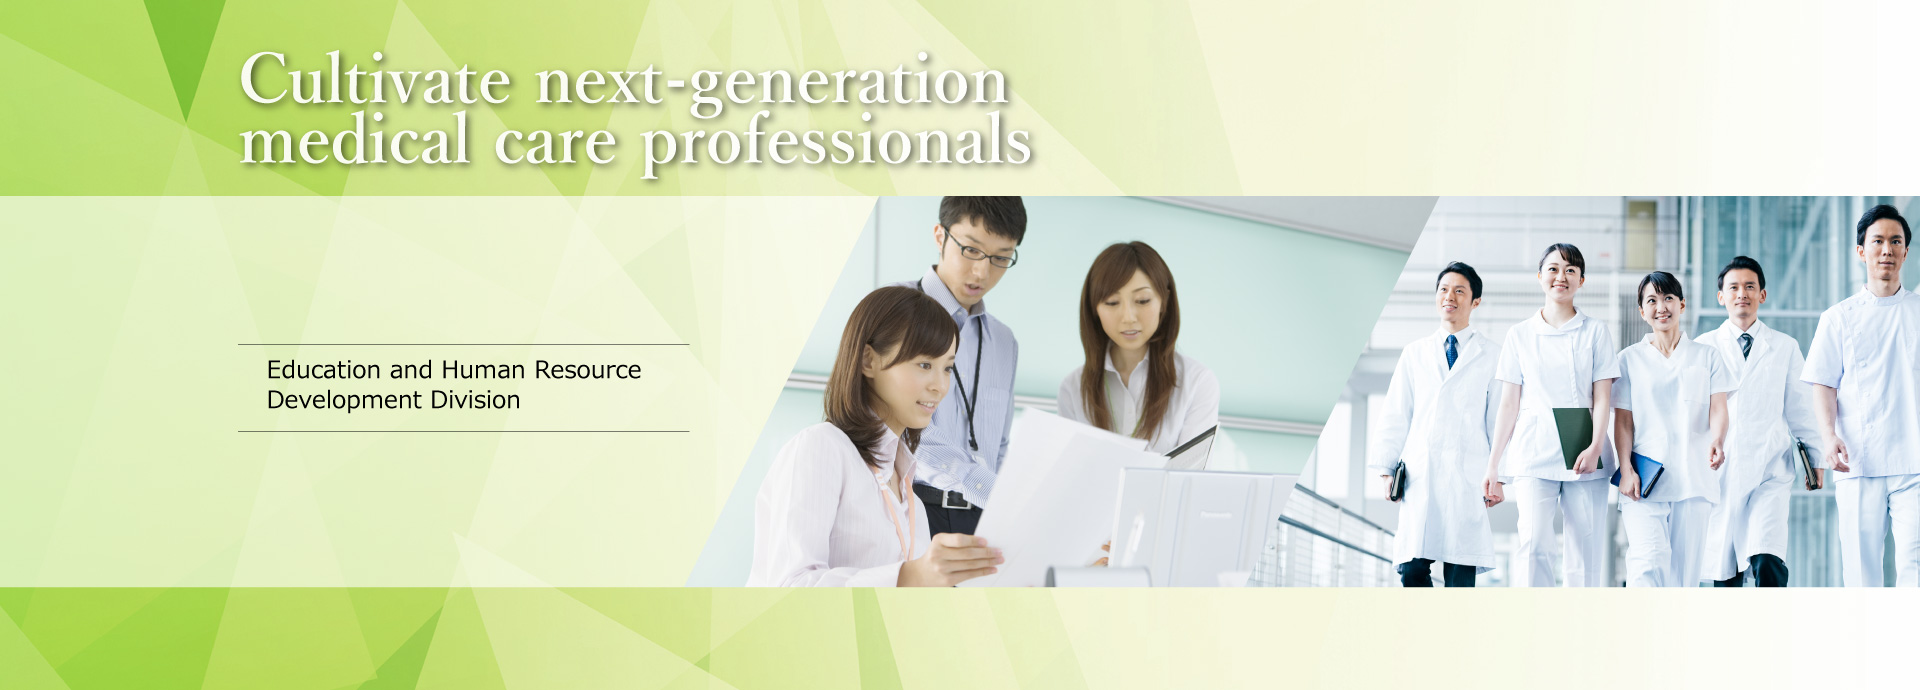 Cultivate next-generation medical care professionals